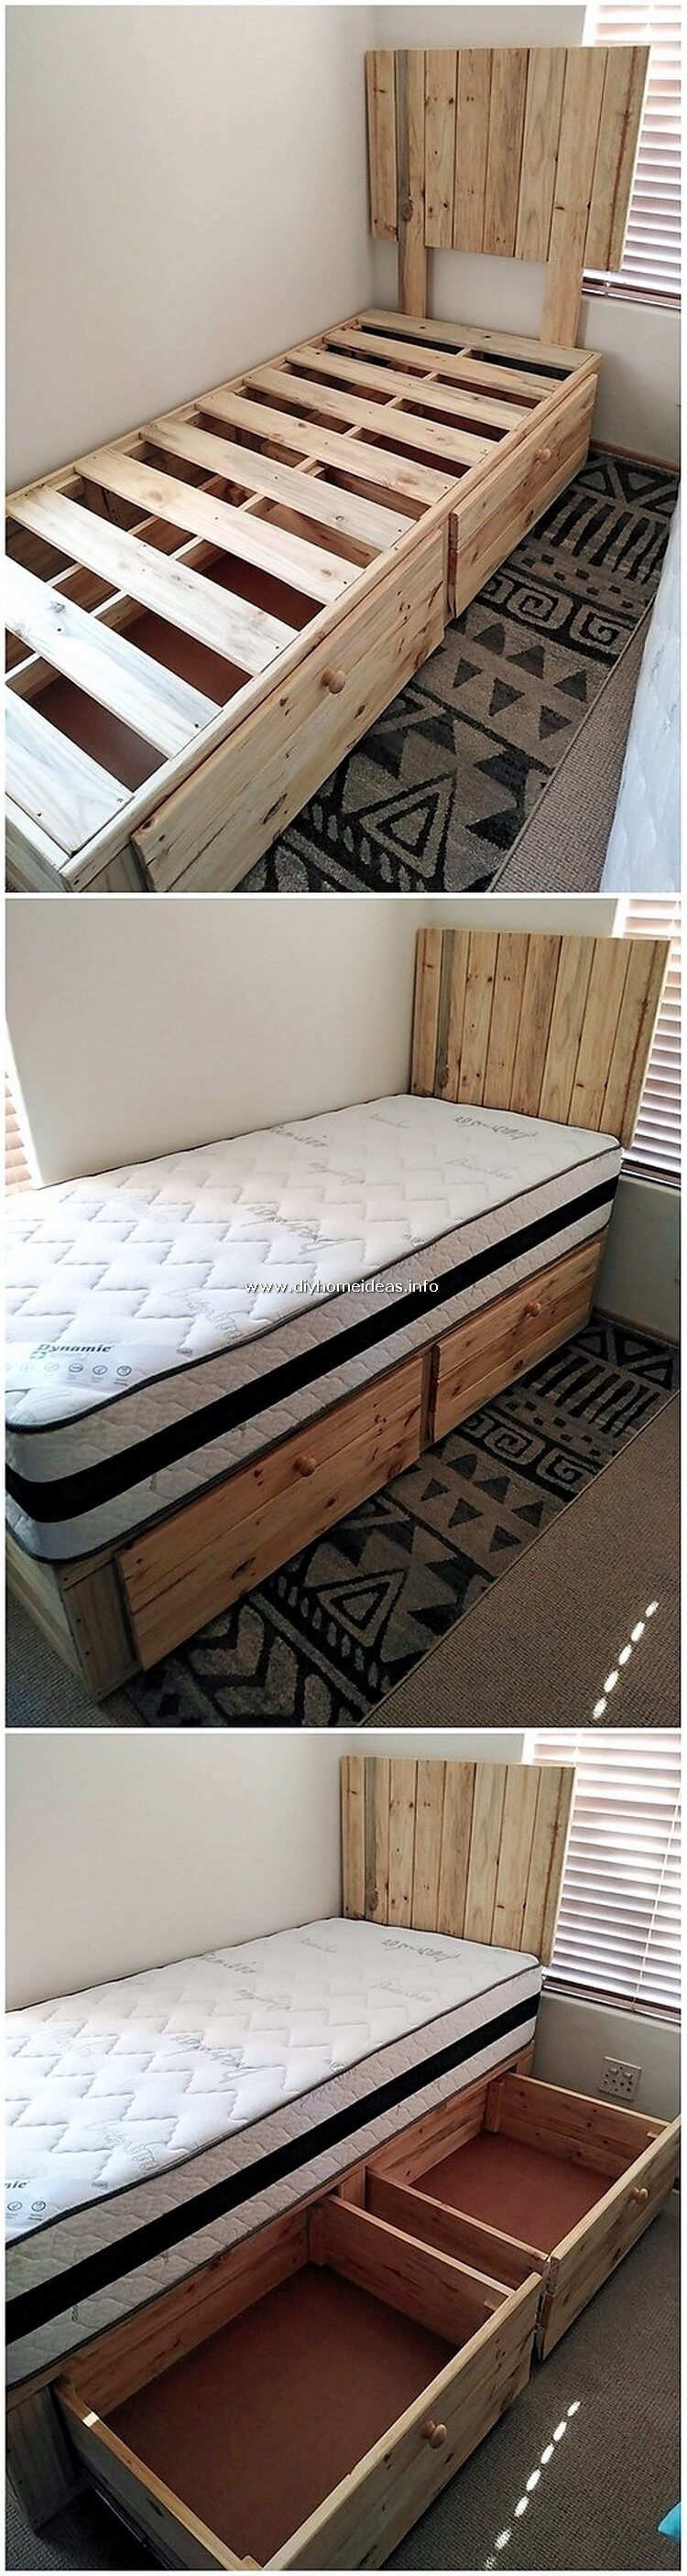 Pallet Wood Bed with Drawers